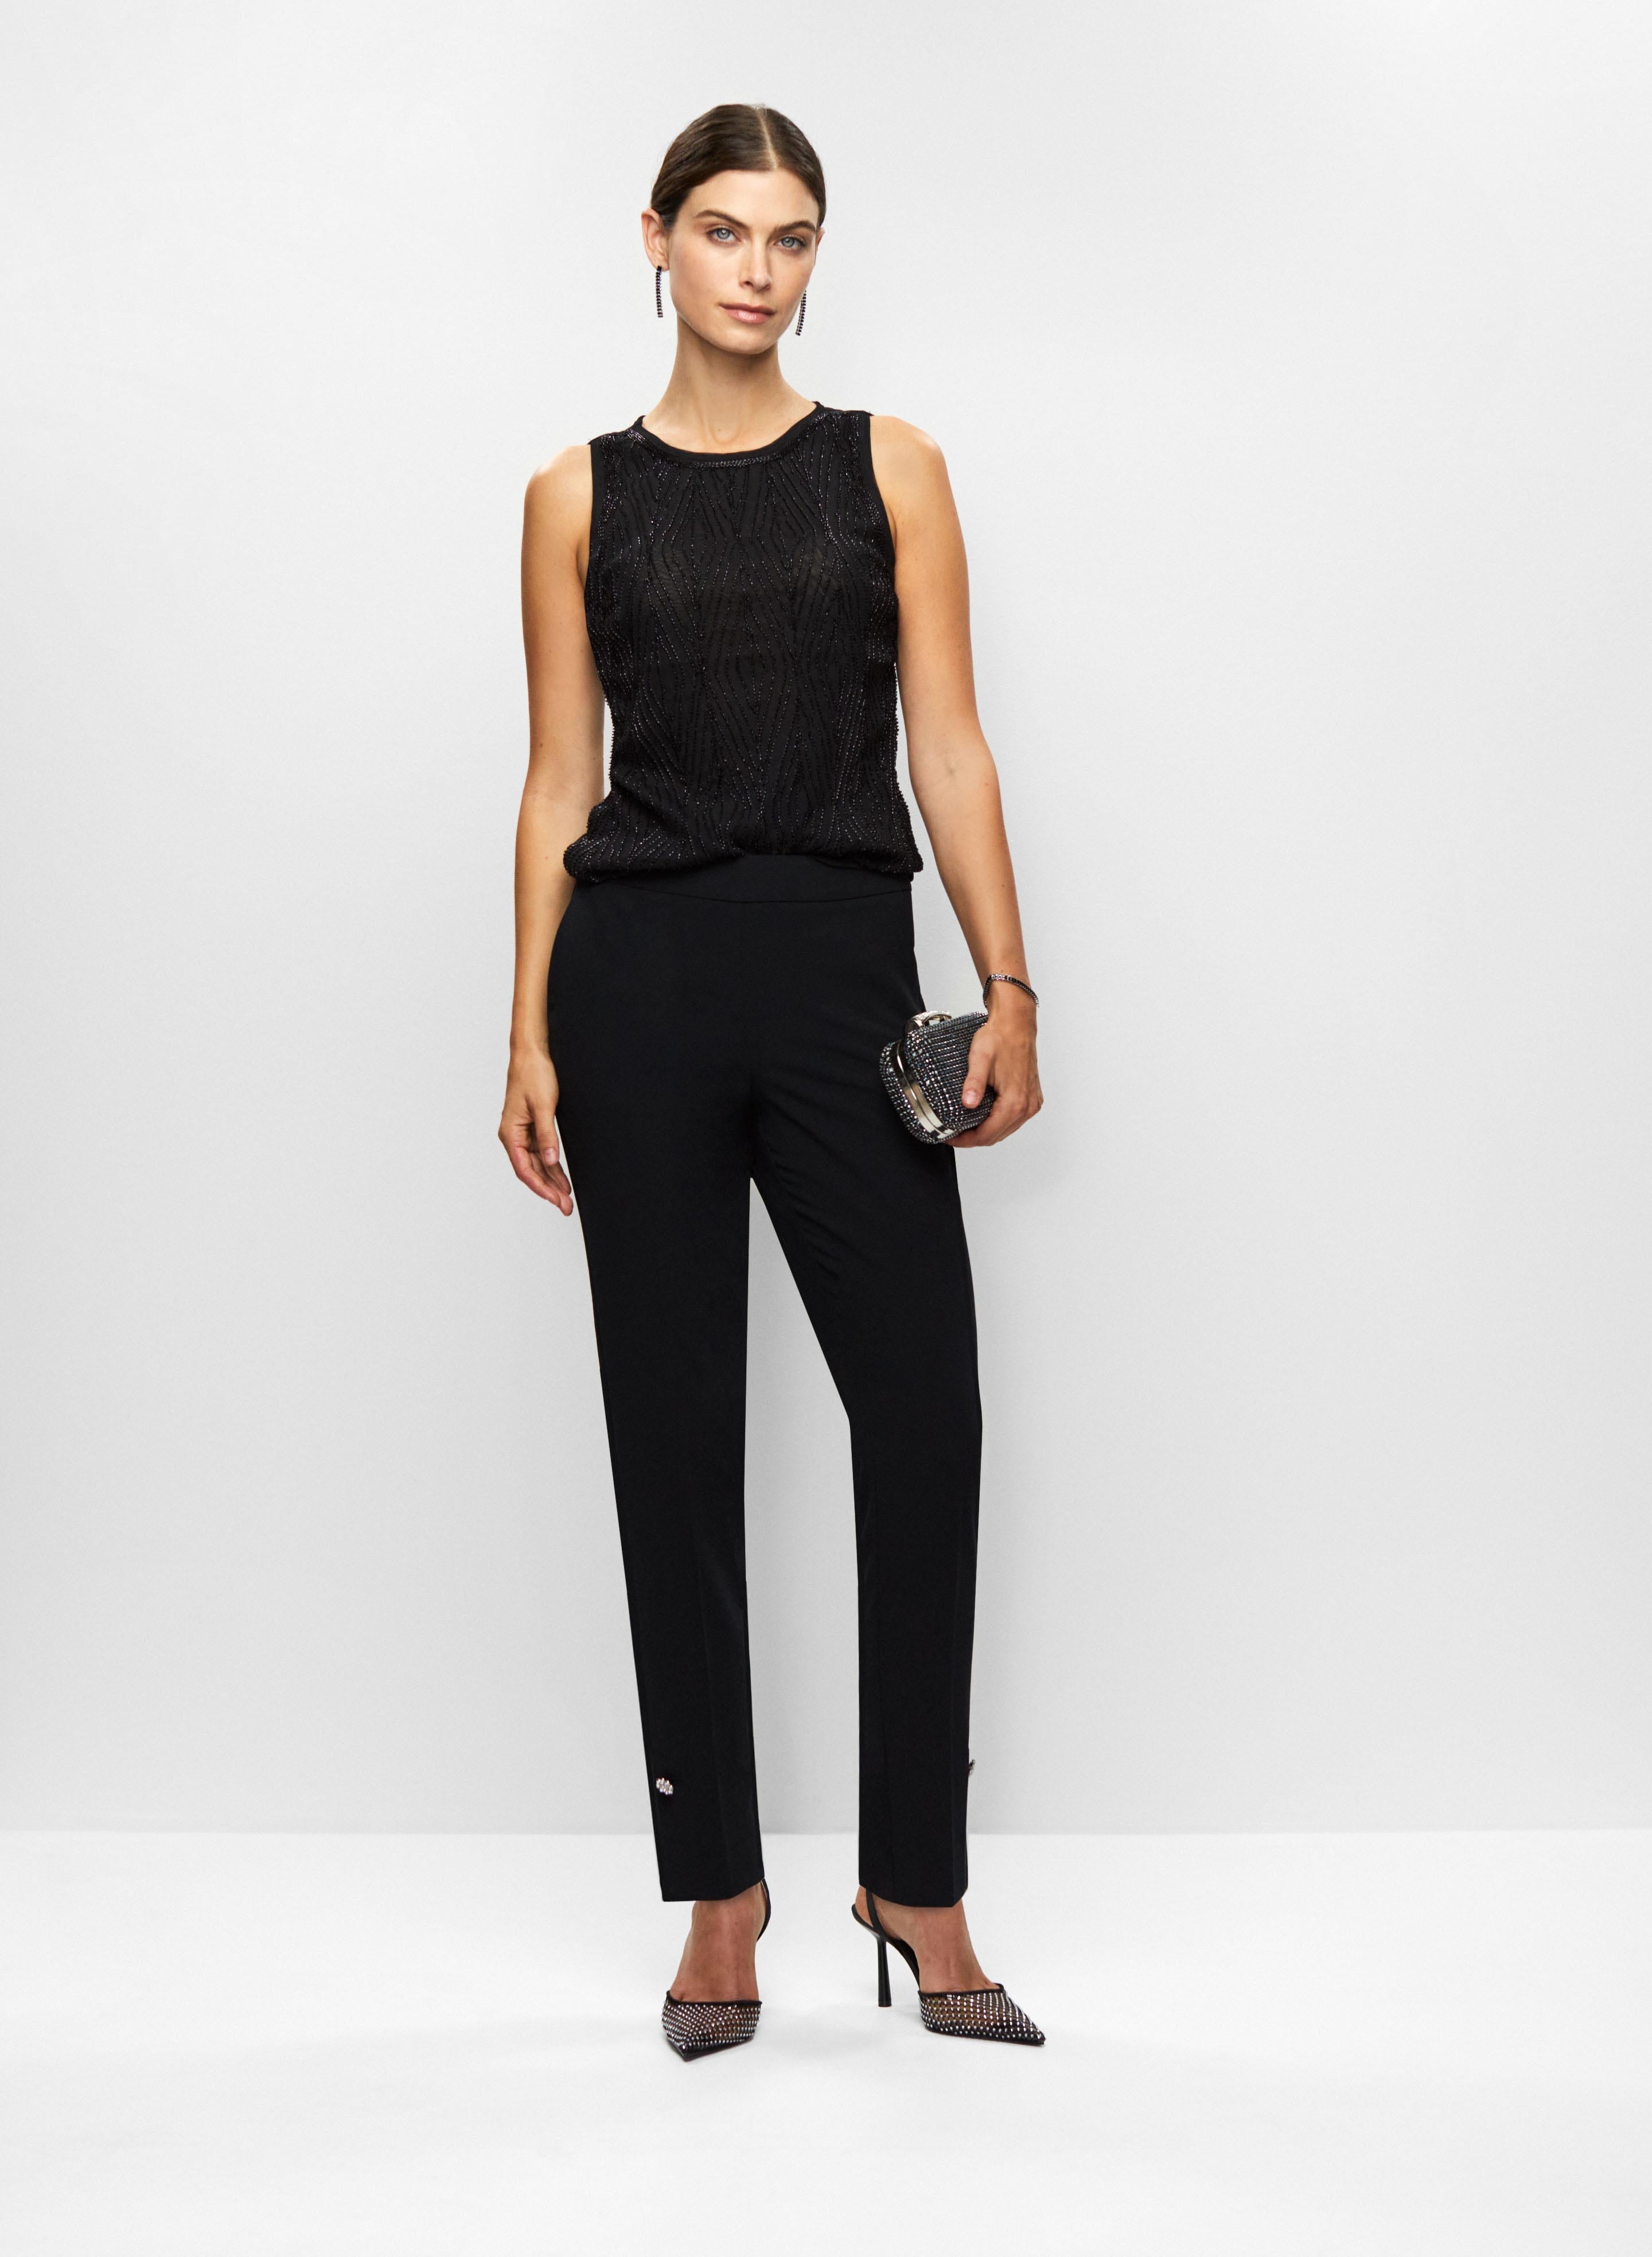 Beaded Top & Button Detail Pants